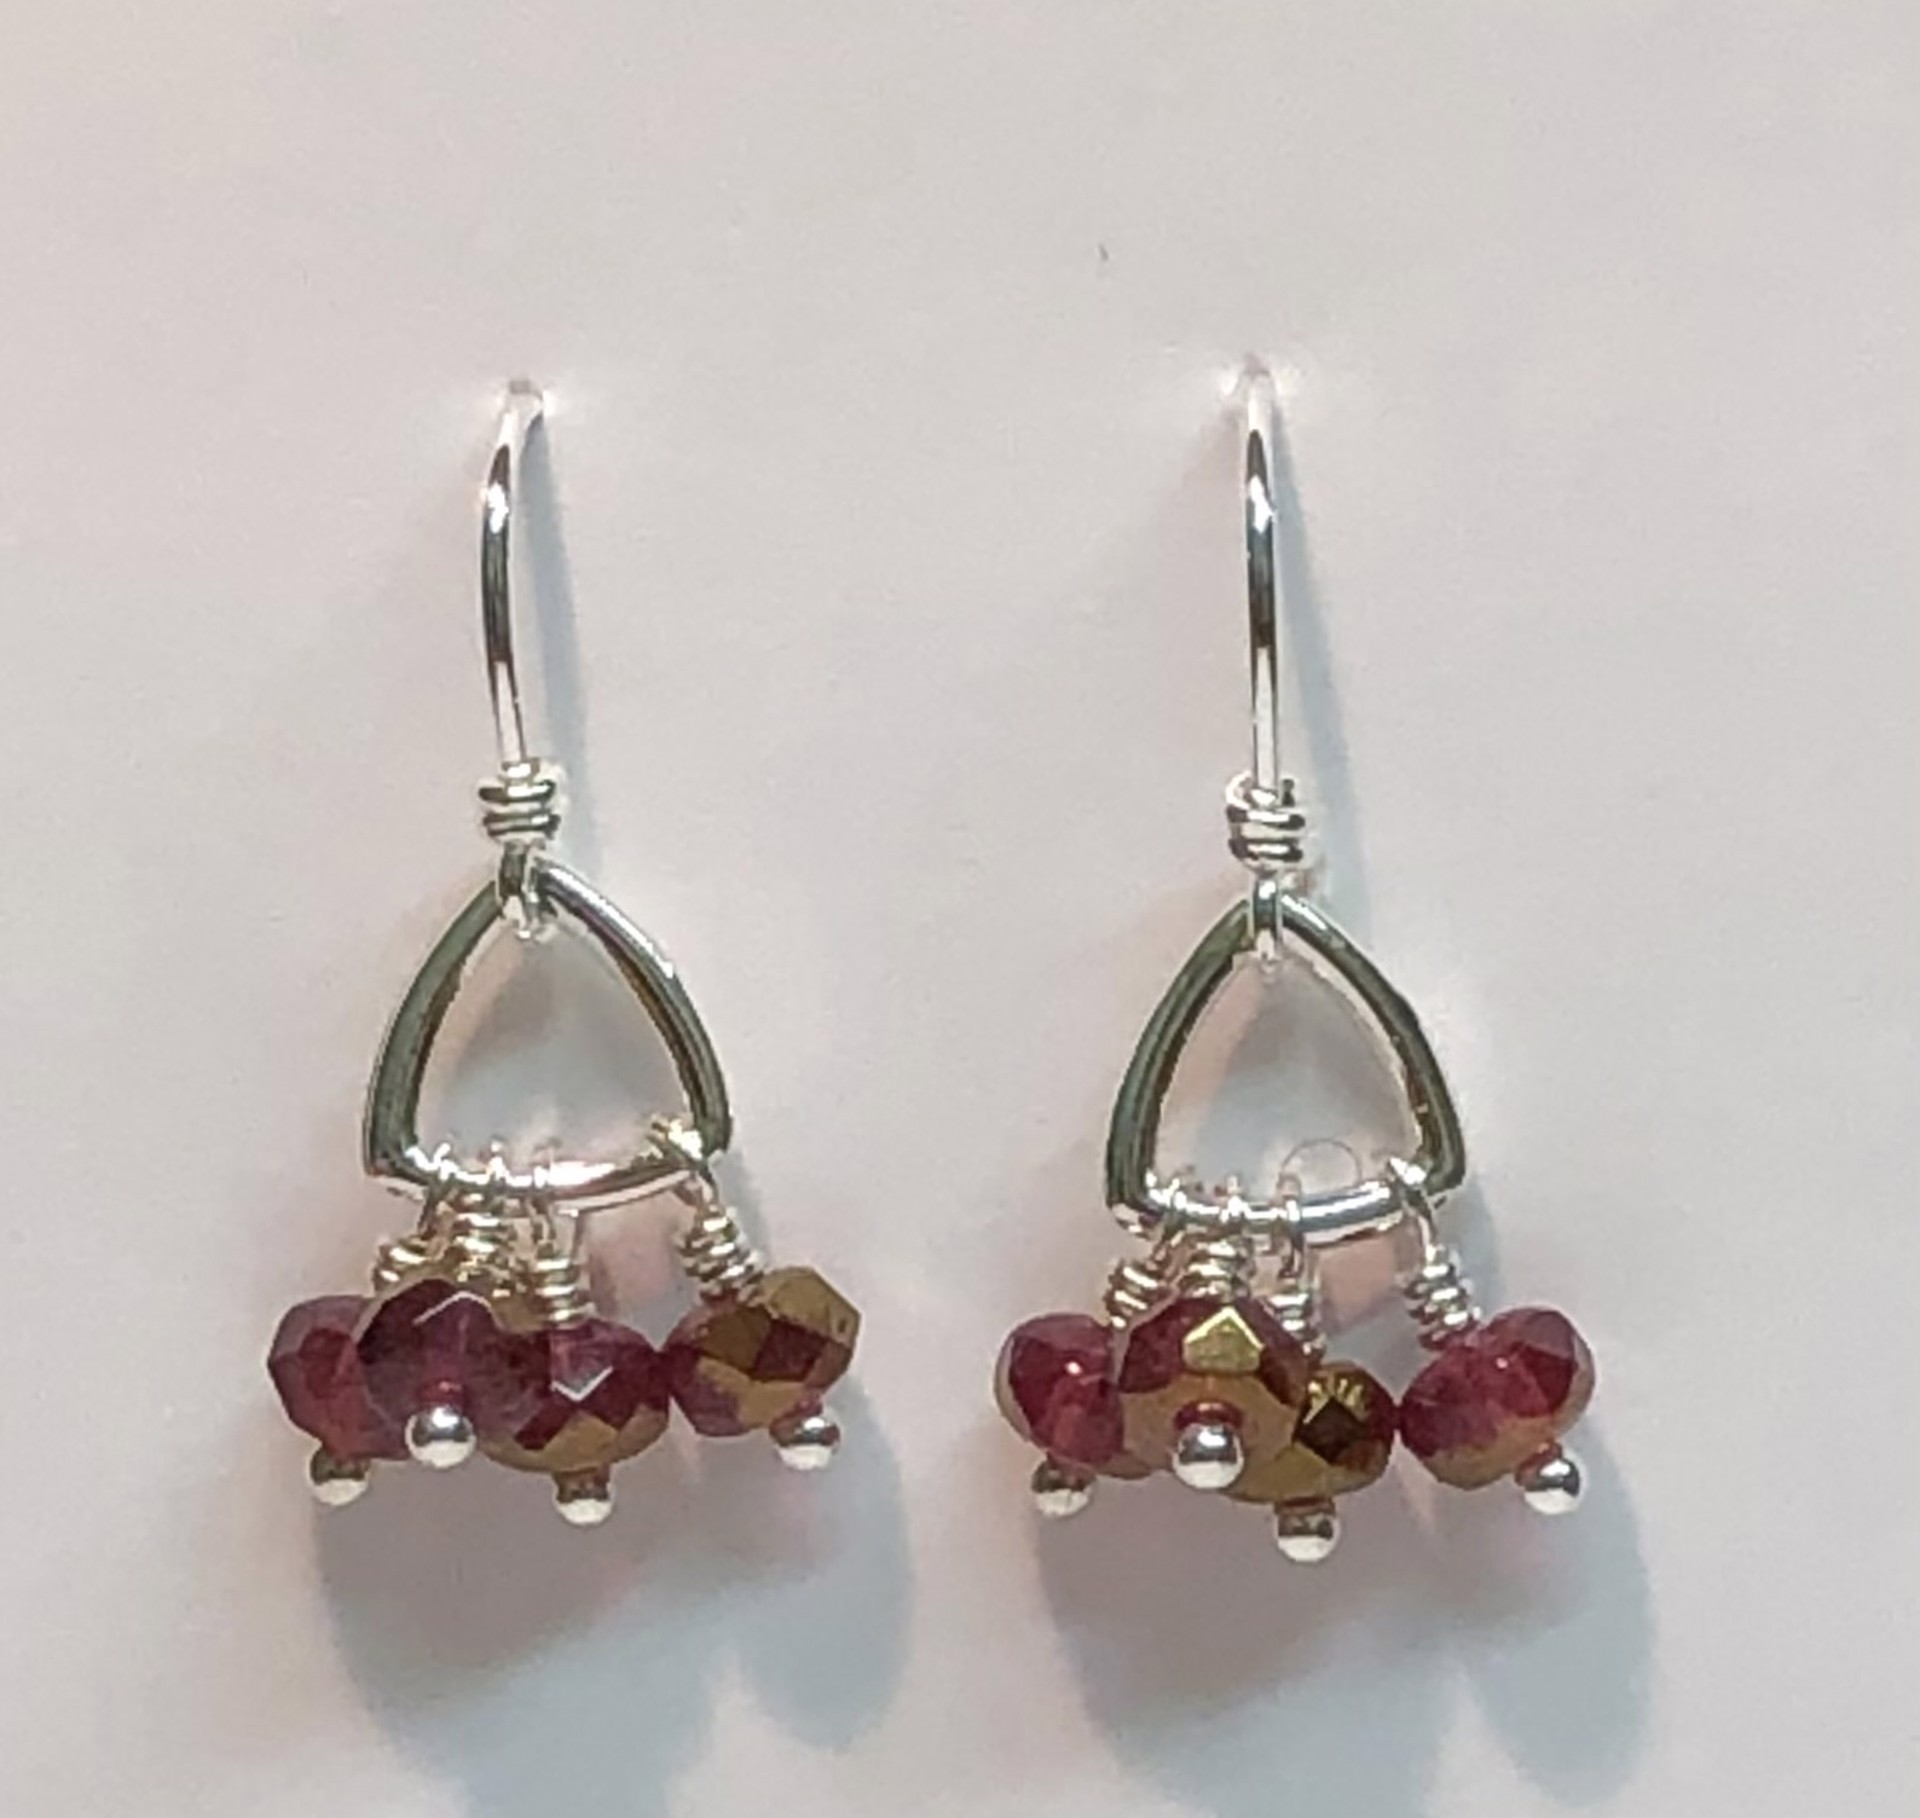 Garnet Czech with Triangle Ring Earring, Sterling Silver by Amelia Whelan